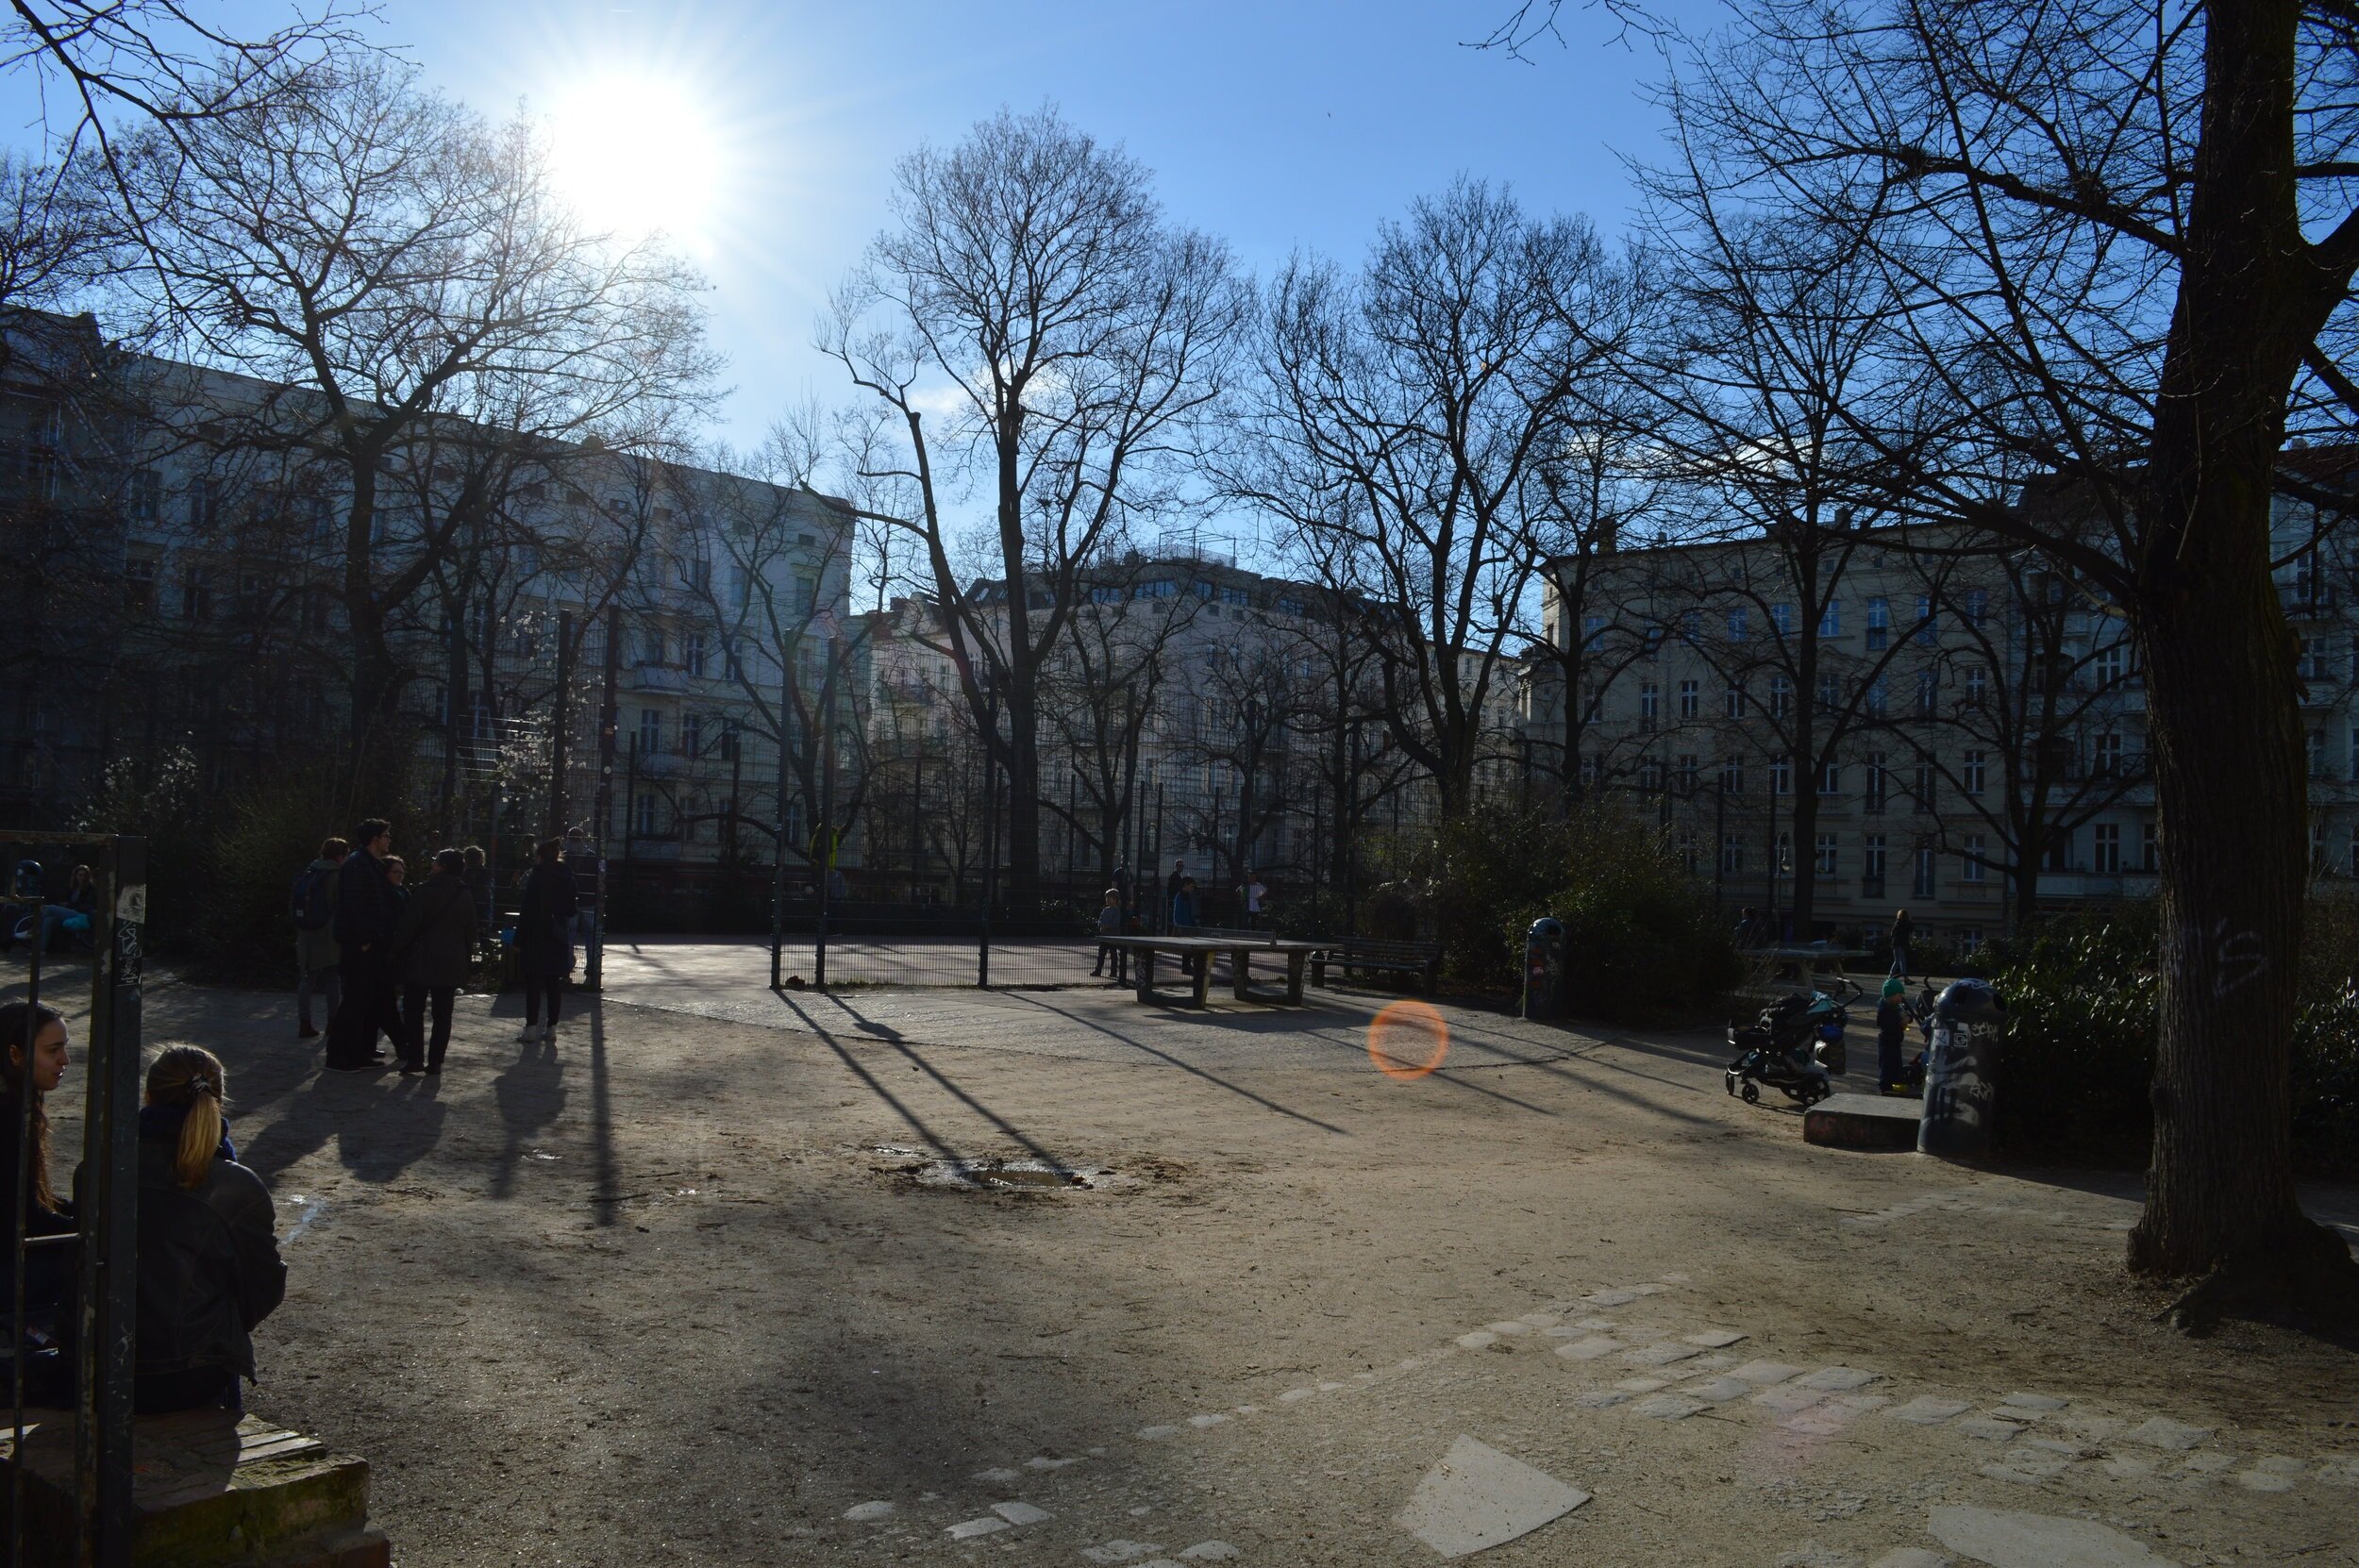 The neighborhood of the coliving space in Prenzlauer Berg